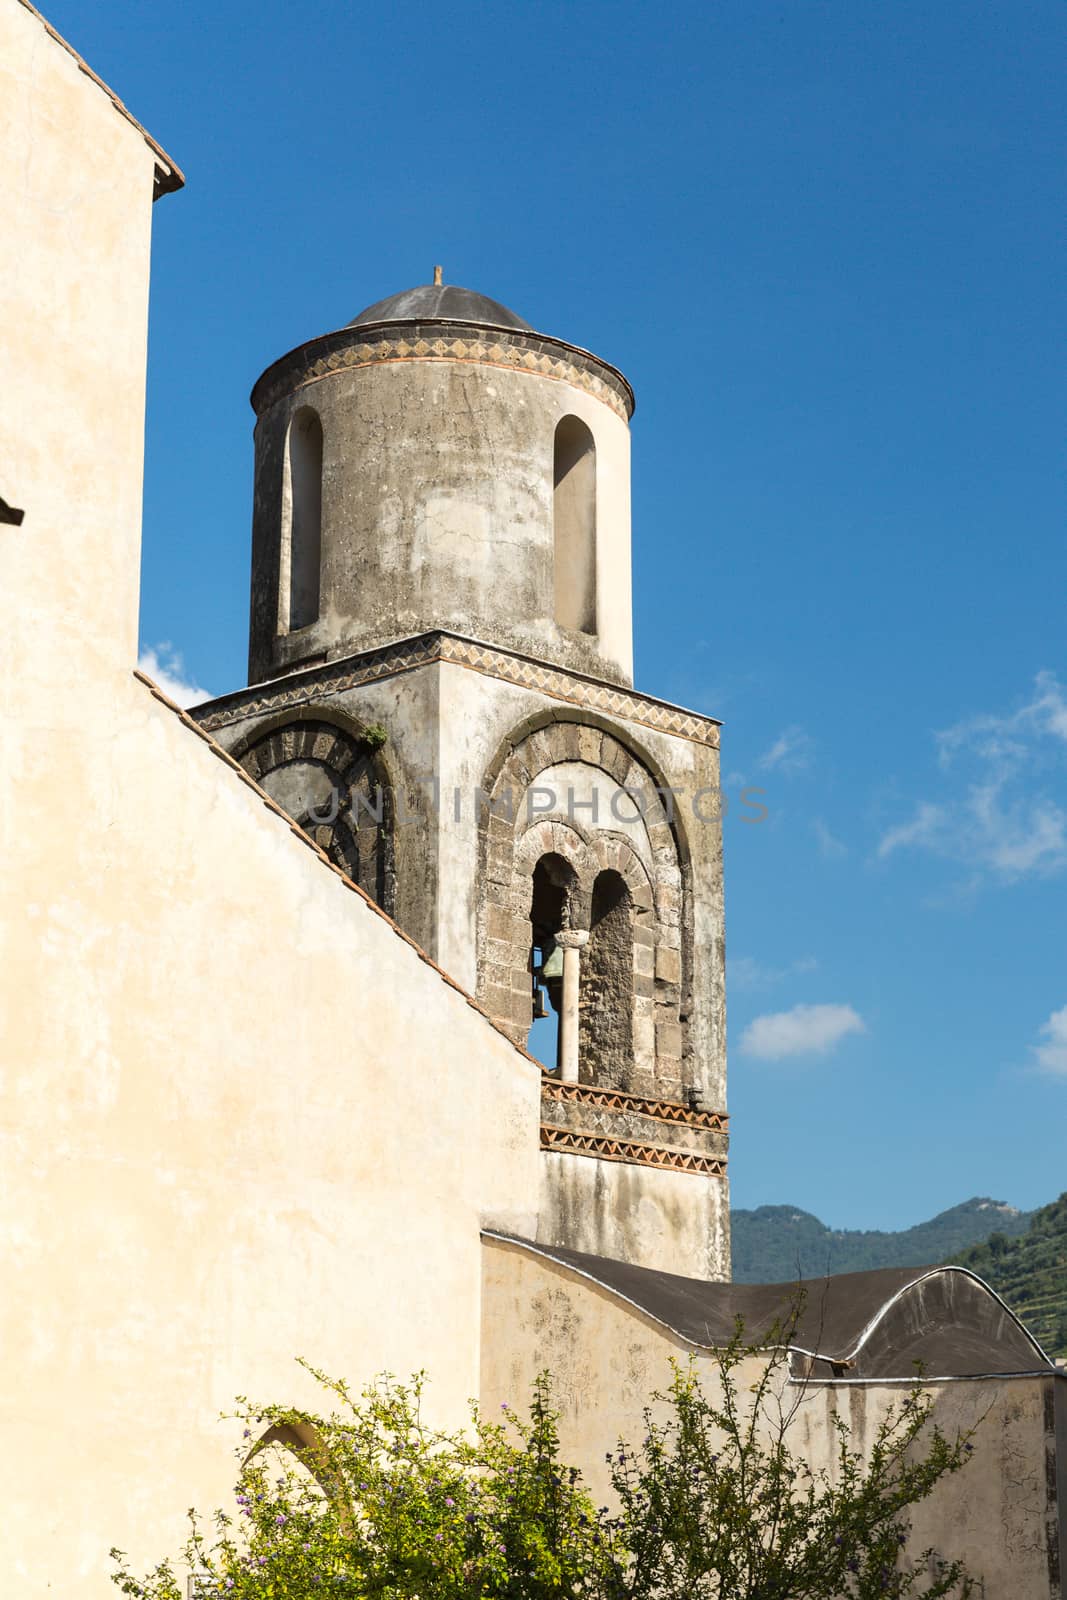 A very old Bell Tower from a church on the Amalfi Coast